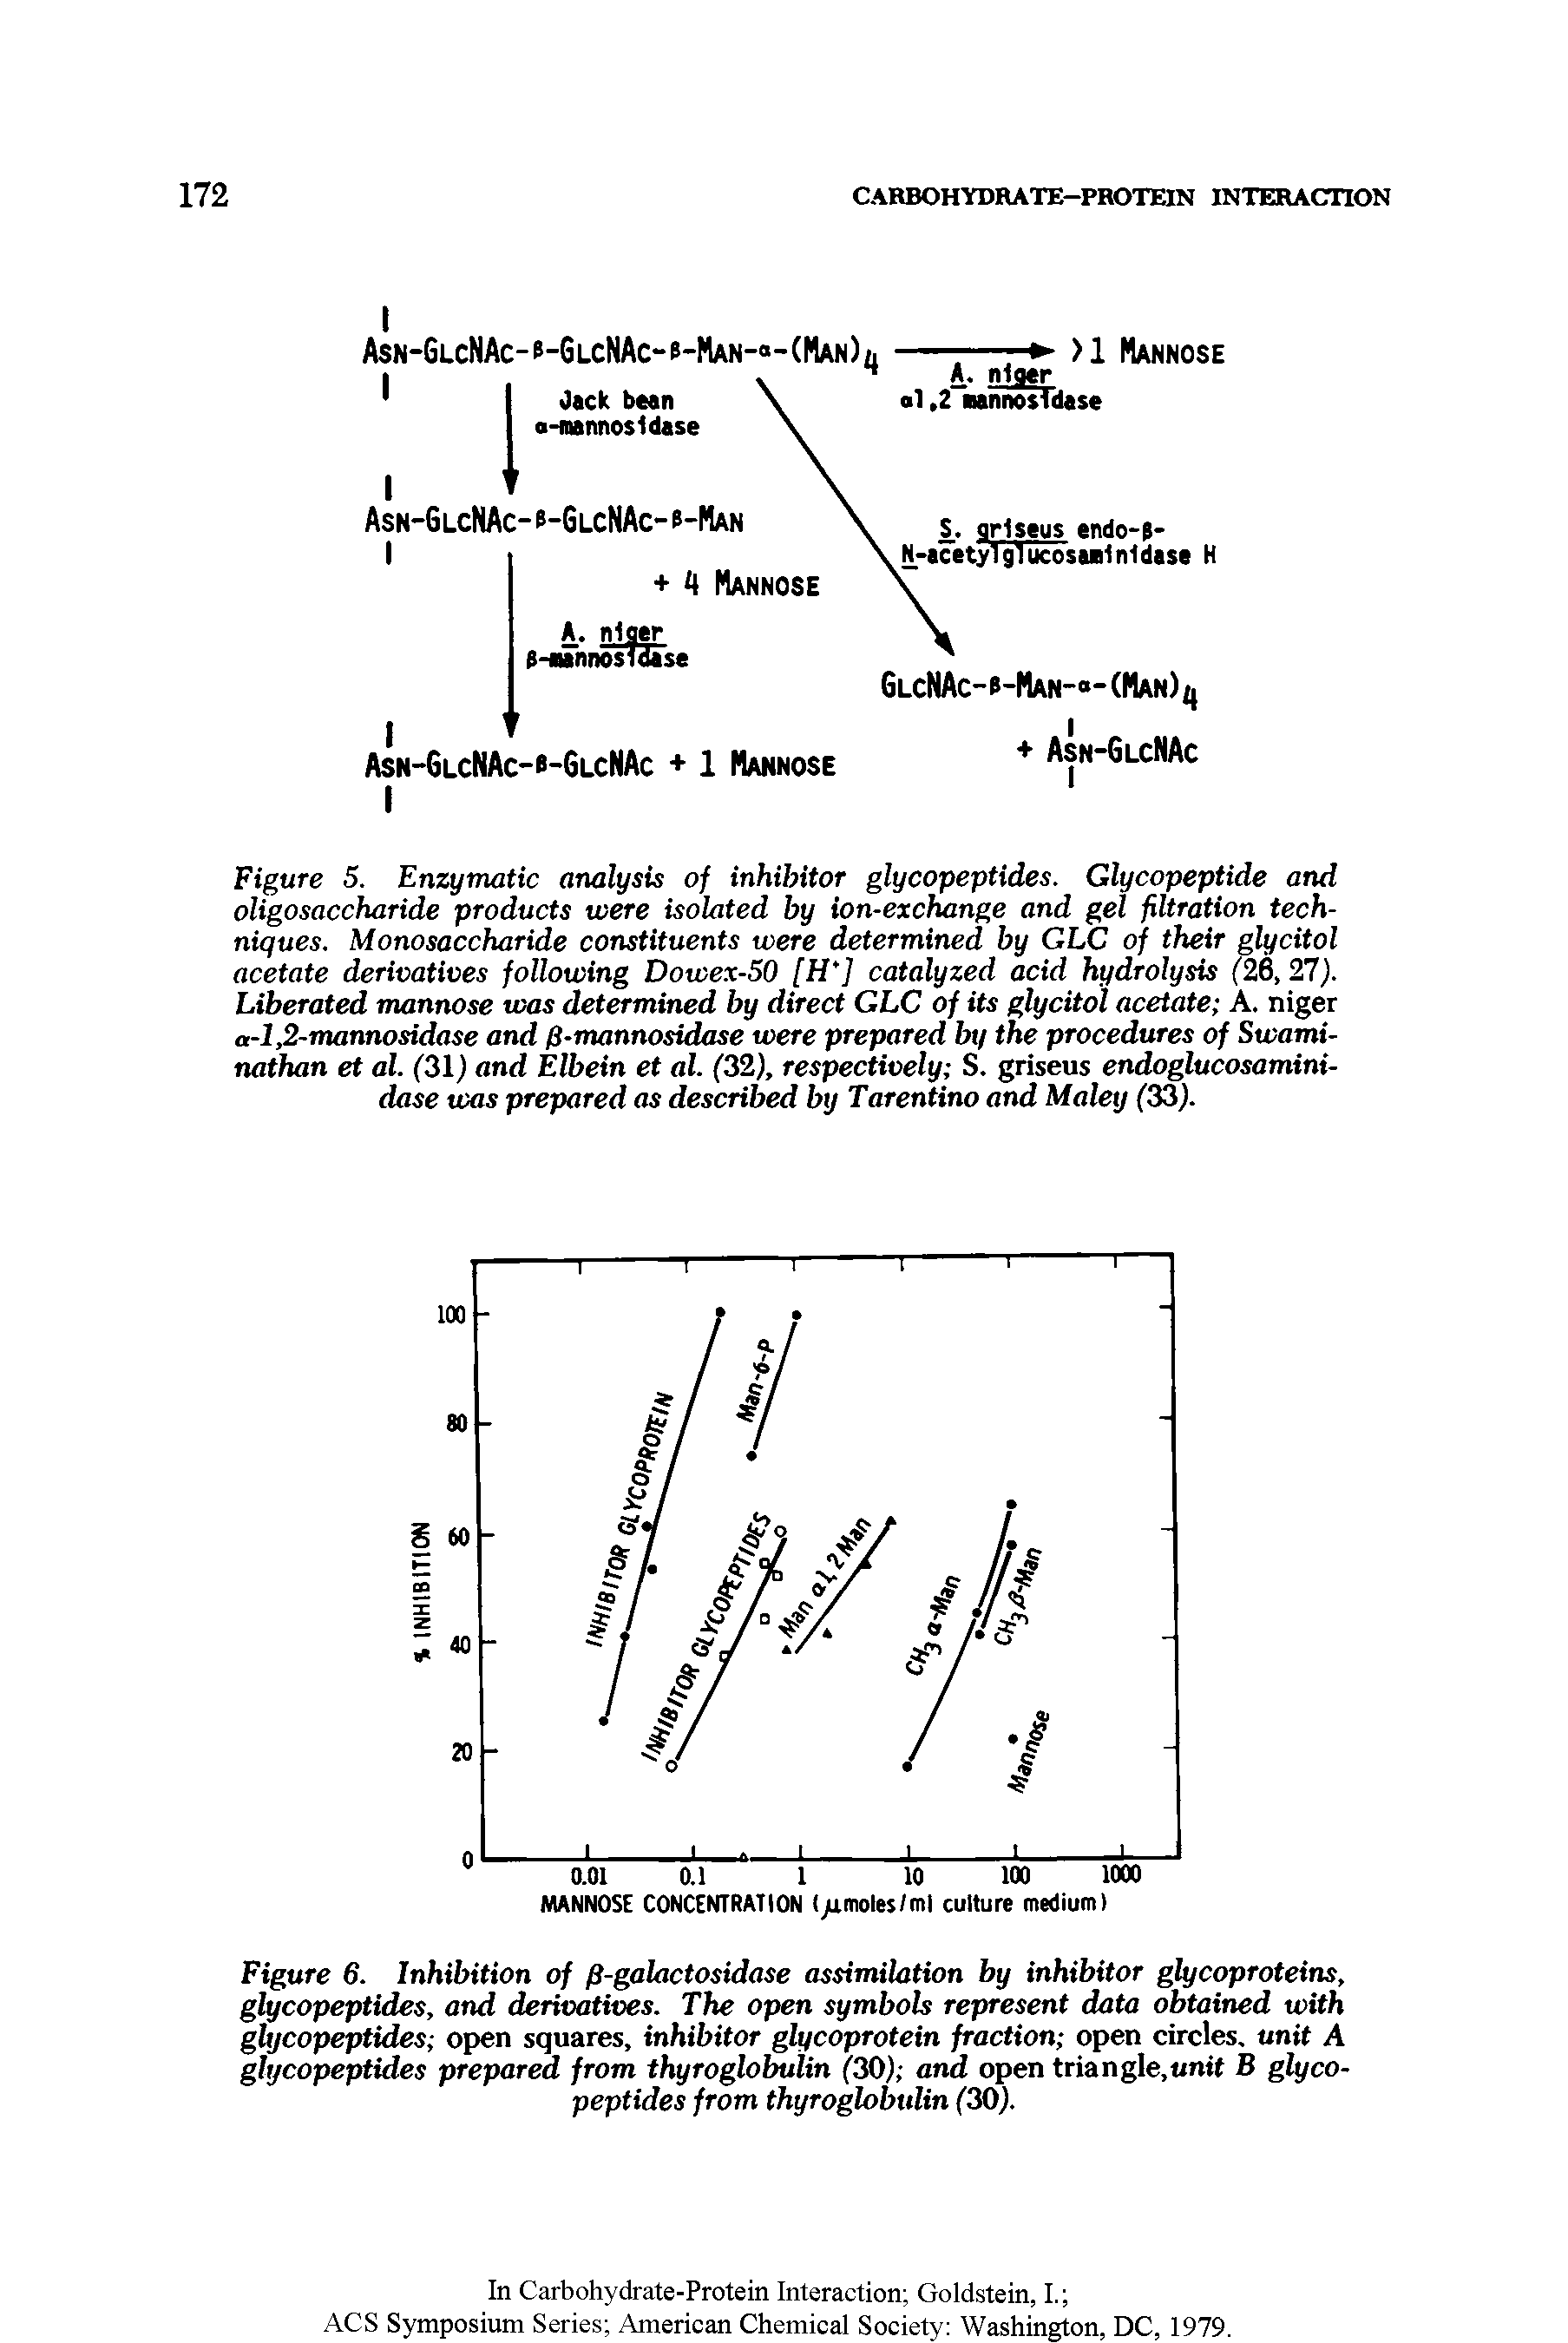 Figure S. Enzymatic analysis of inhibitor glycopeptides. Glycopeptide and oligosaccharide products were isolated by ion-exchange and gel filtration techniques. Monosaccharide constituents were determined by GLC of their glycitol acetate derivatives following Dowex-SO [H J catalyzed acid hydrolysis ("26, 27). Liberated mannose was determined by direct GLC of its glycitol acetate A. niger a-l,2-mannosidase and fl-mannosidase were prepared by the procedures of Swami-nathan et al. (31) and Elbein et al. (32), respectively S. griseus endoglucosamini-dase teas prepared as described by Tarentino and Maley (33).